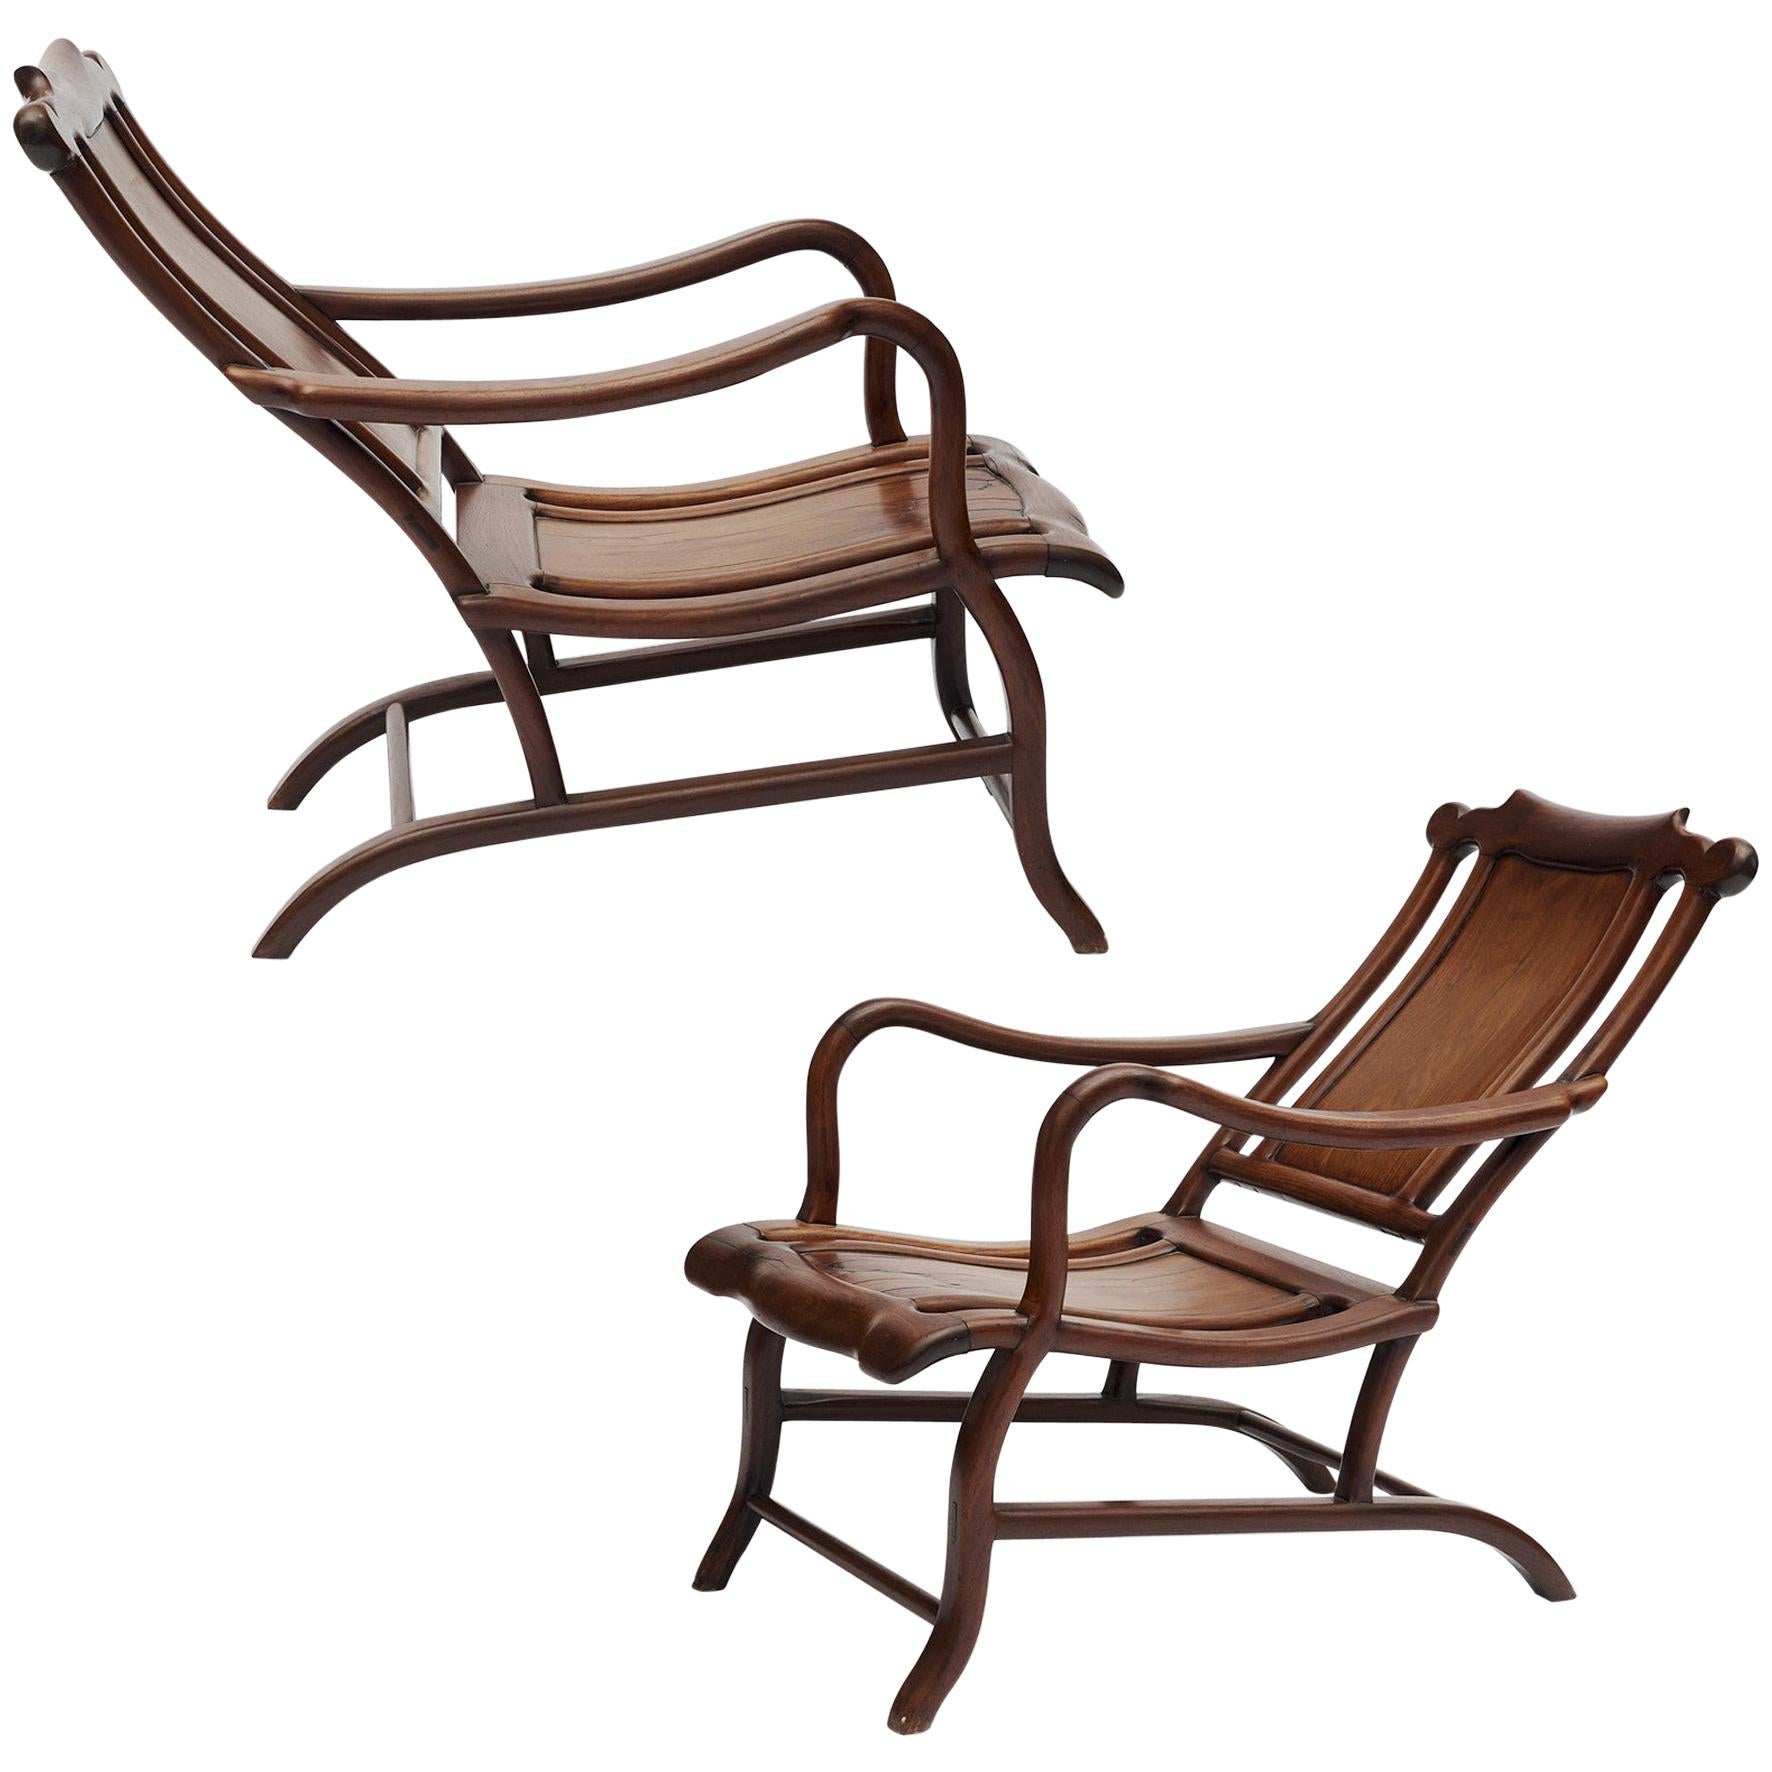 Pair of Chinese Art Deco deck chairs/ moon gazing chair made of Hongmu wood (blackwood).
Paneled seat with slightly curved armrests.
Great craftsmanship. One seat repaired (see photo).
Shanghai, 1910-1920.
 